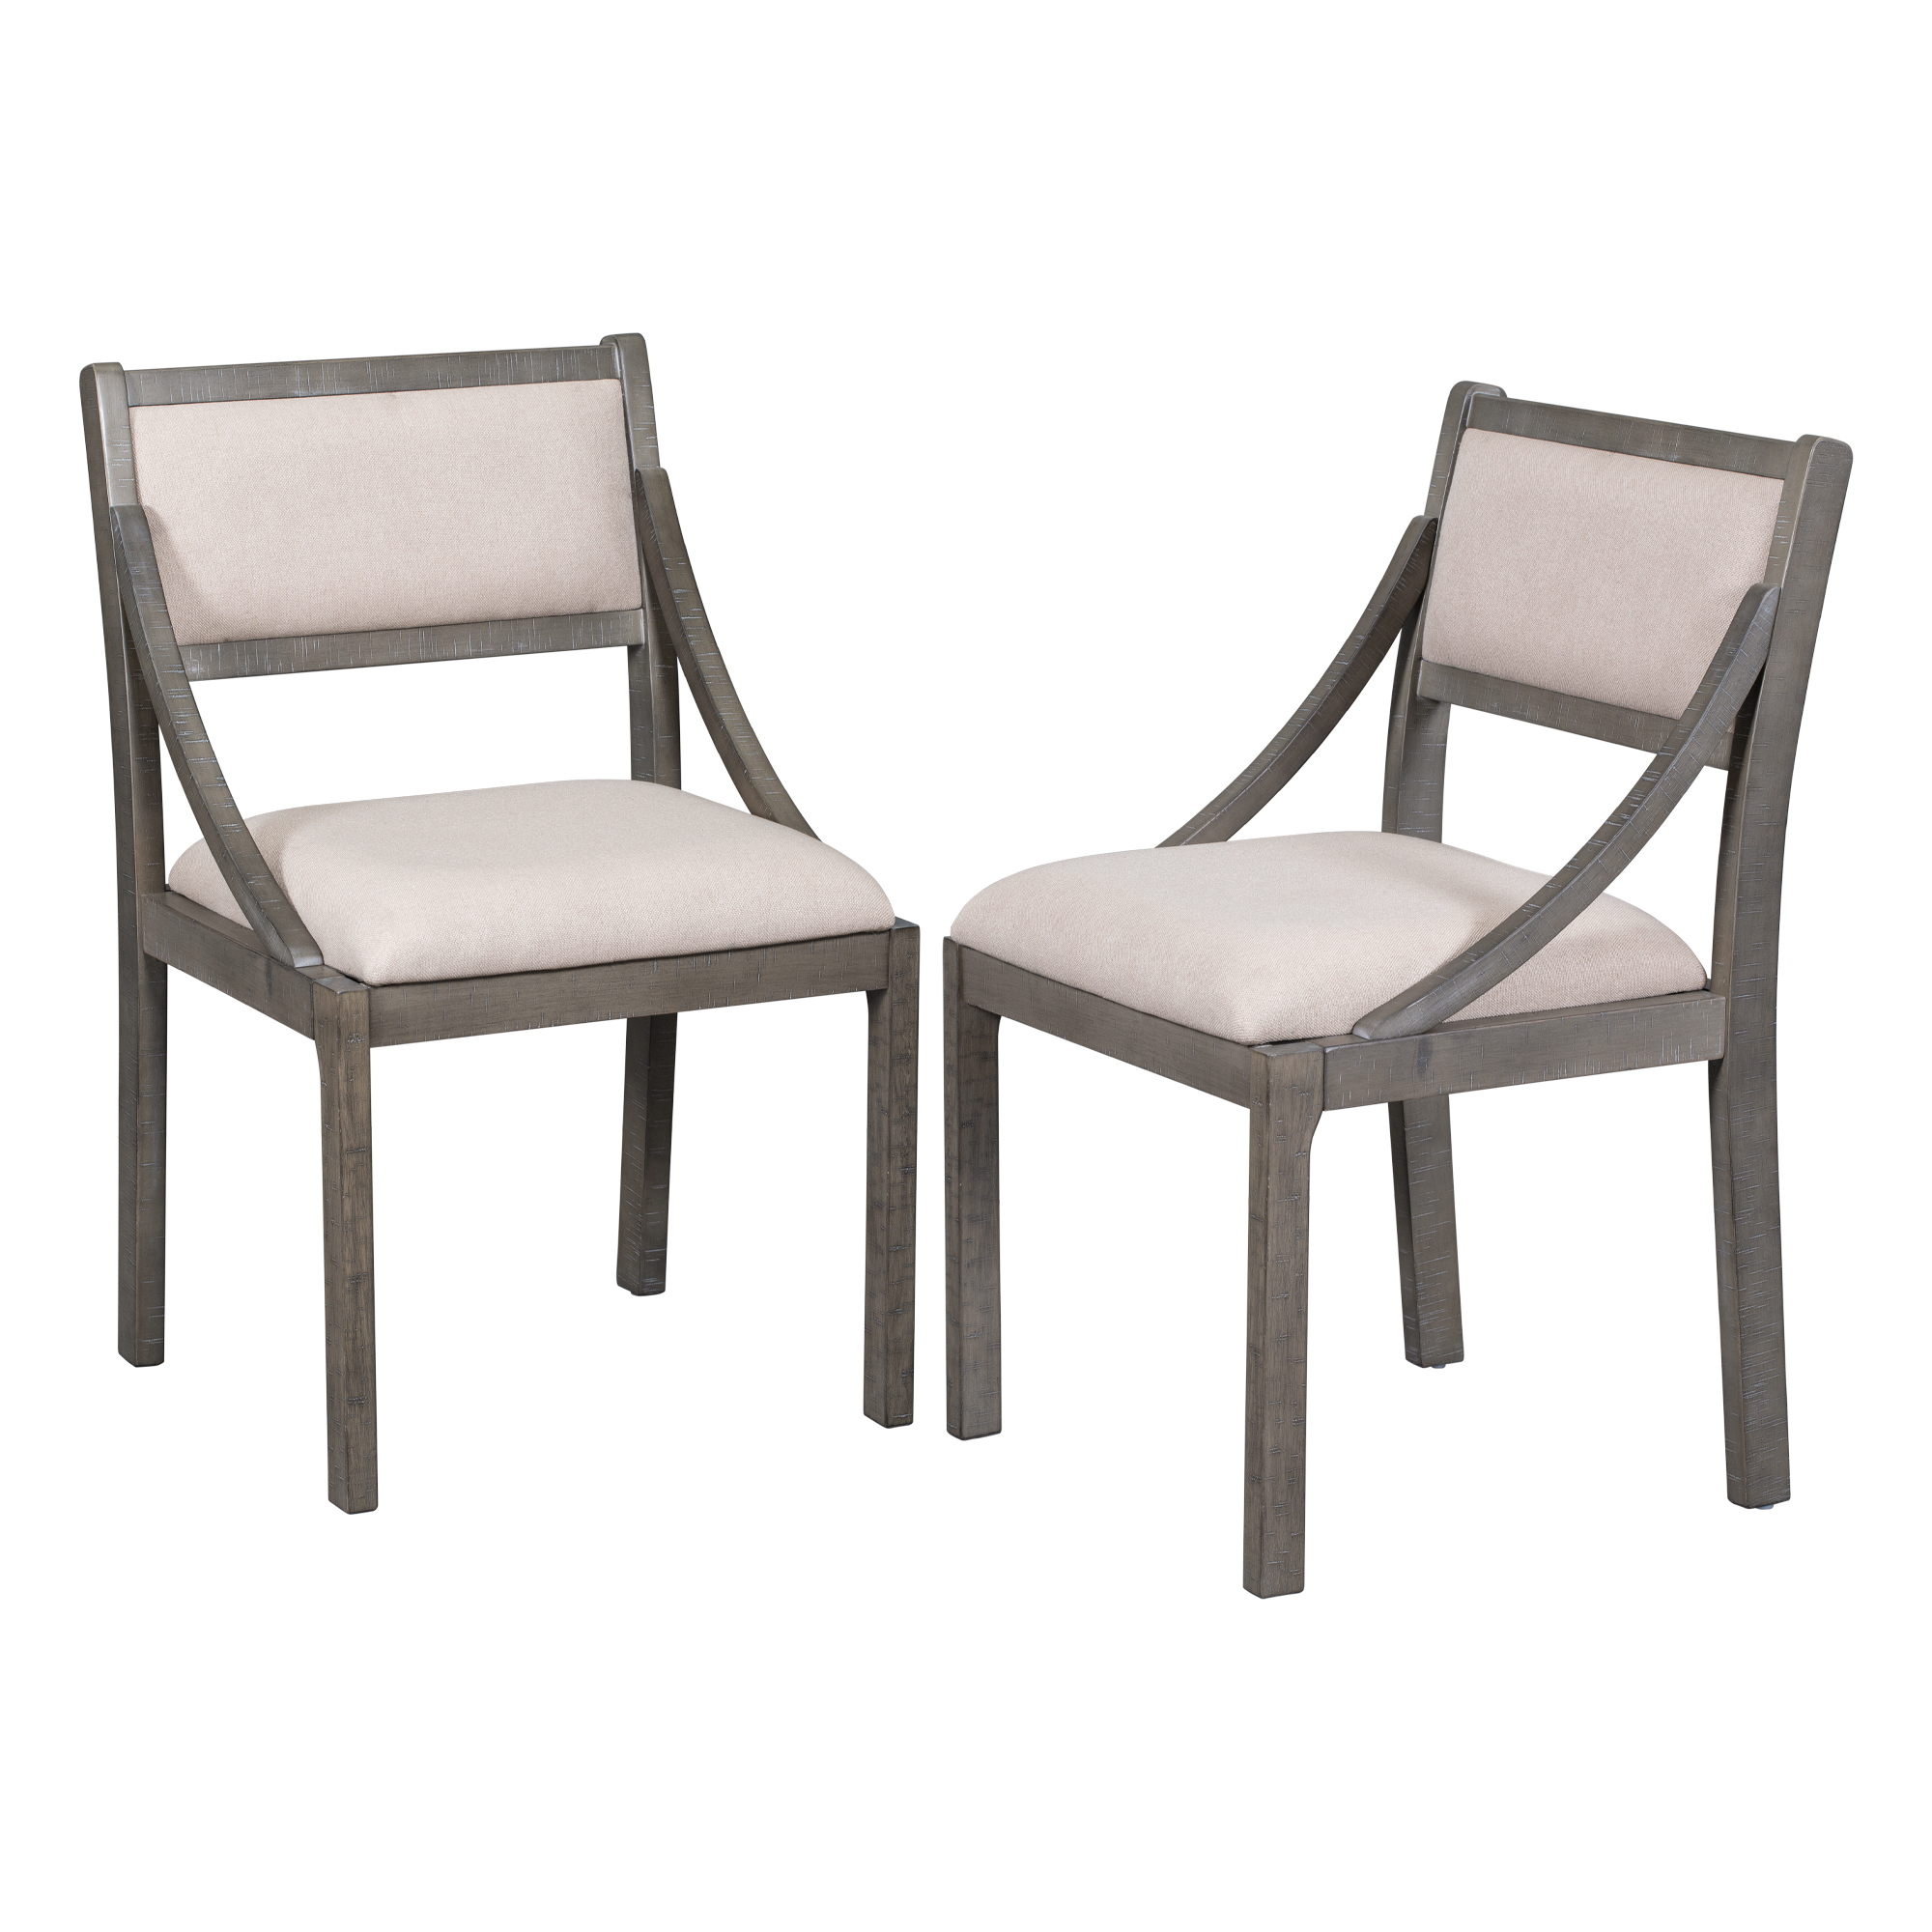 TREXM Retro Wood Dining Chairs Set of 2 - WF295747AAP